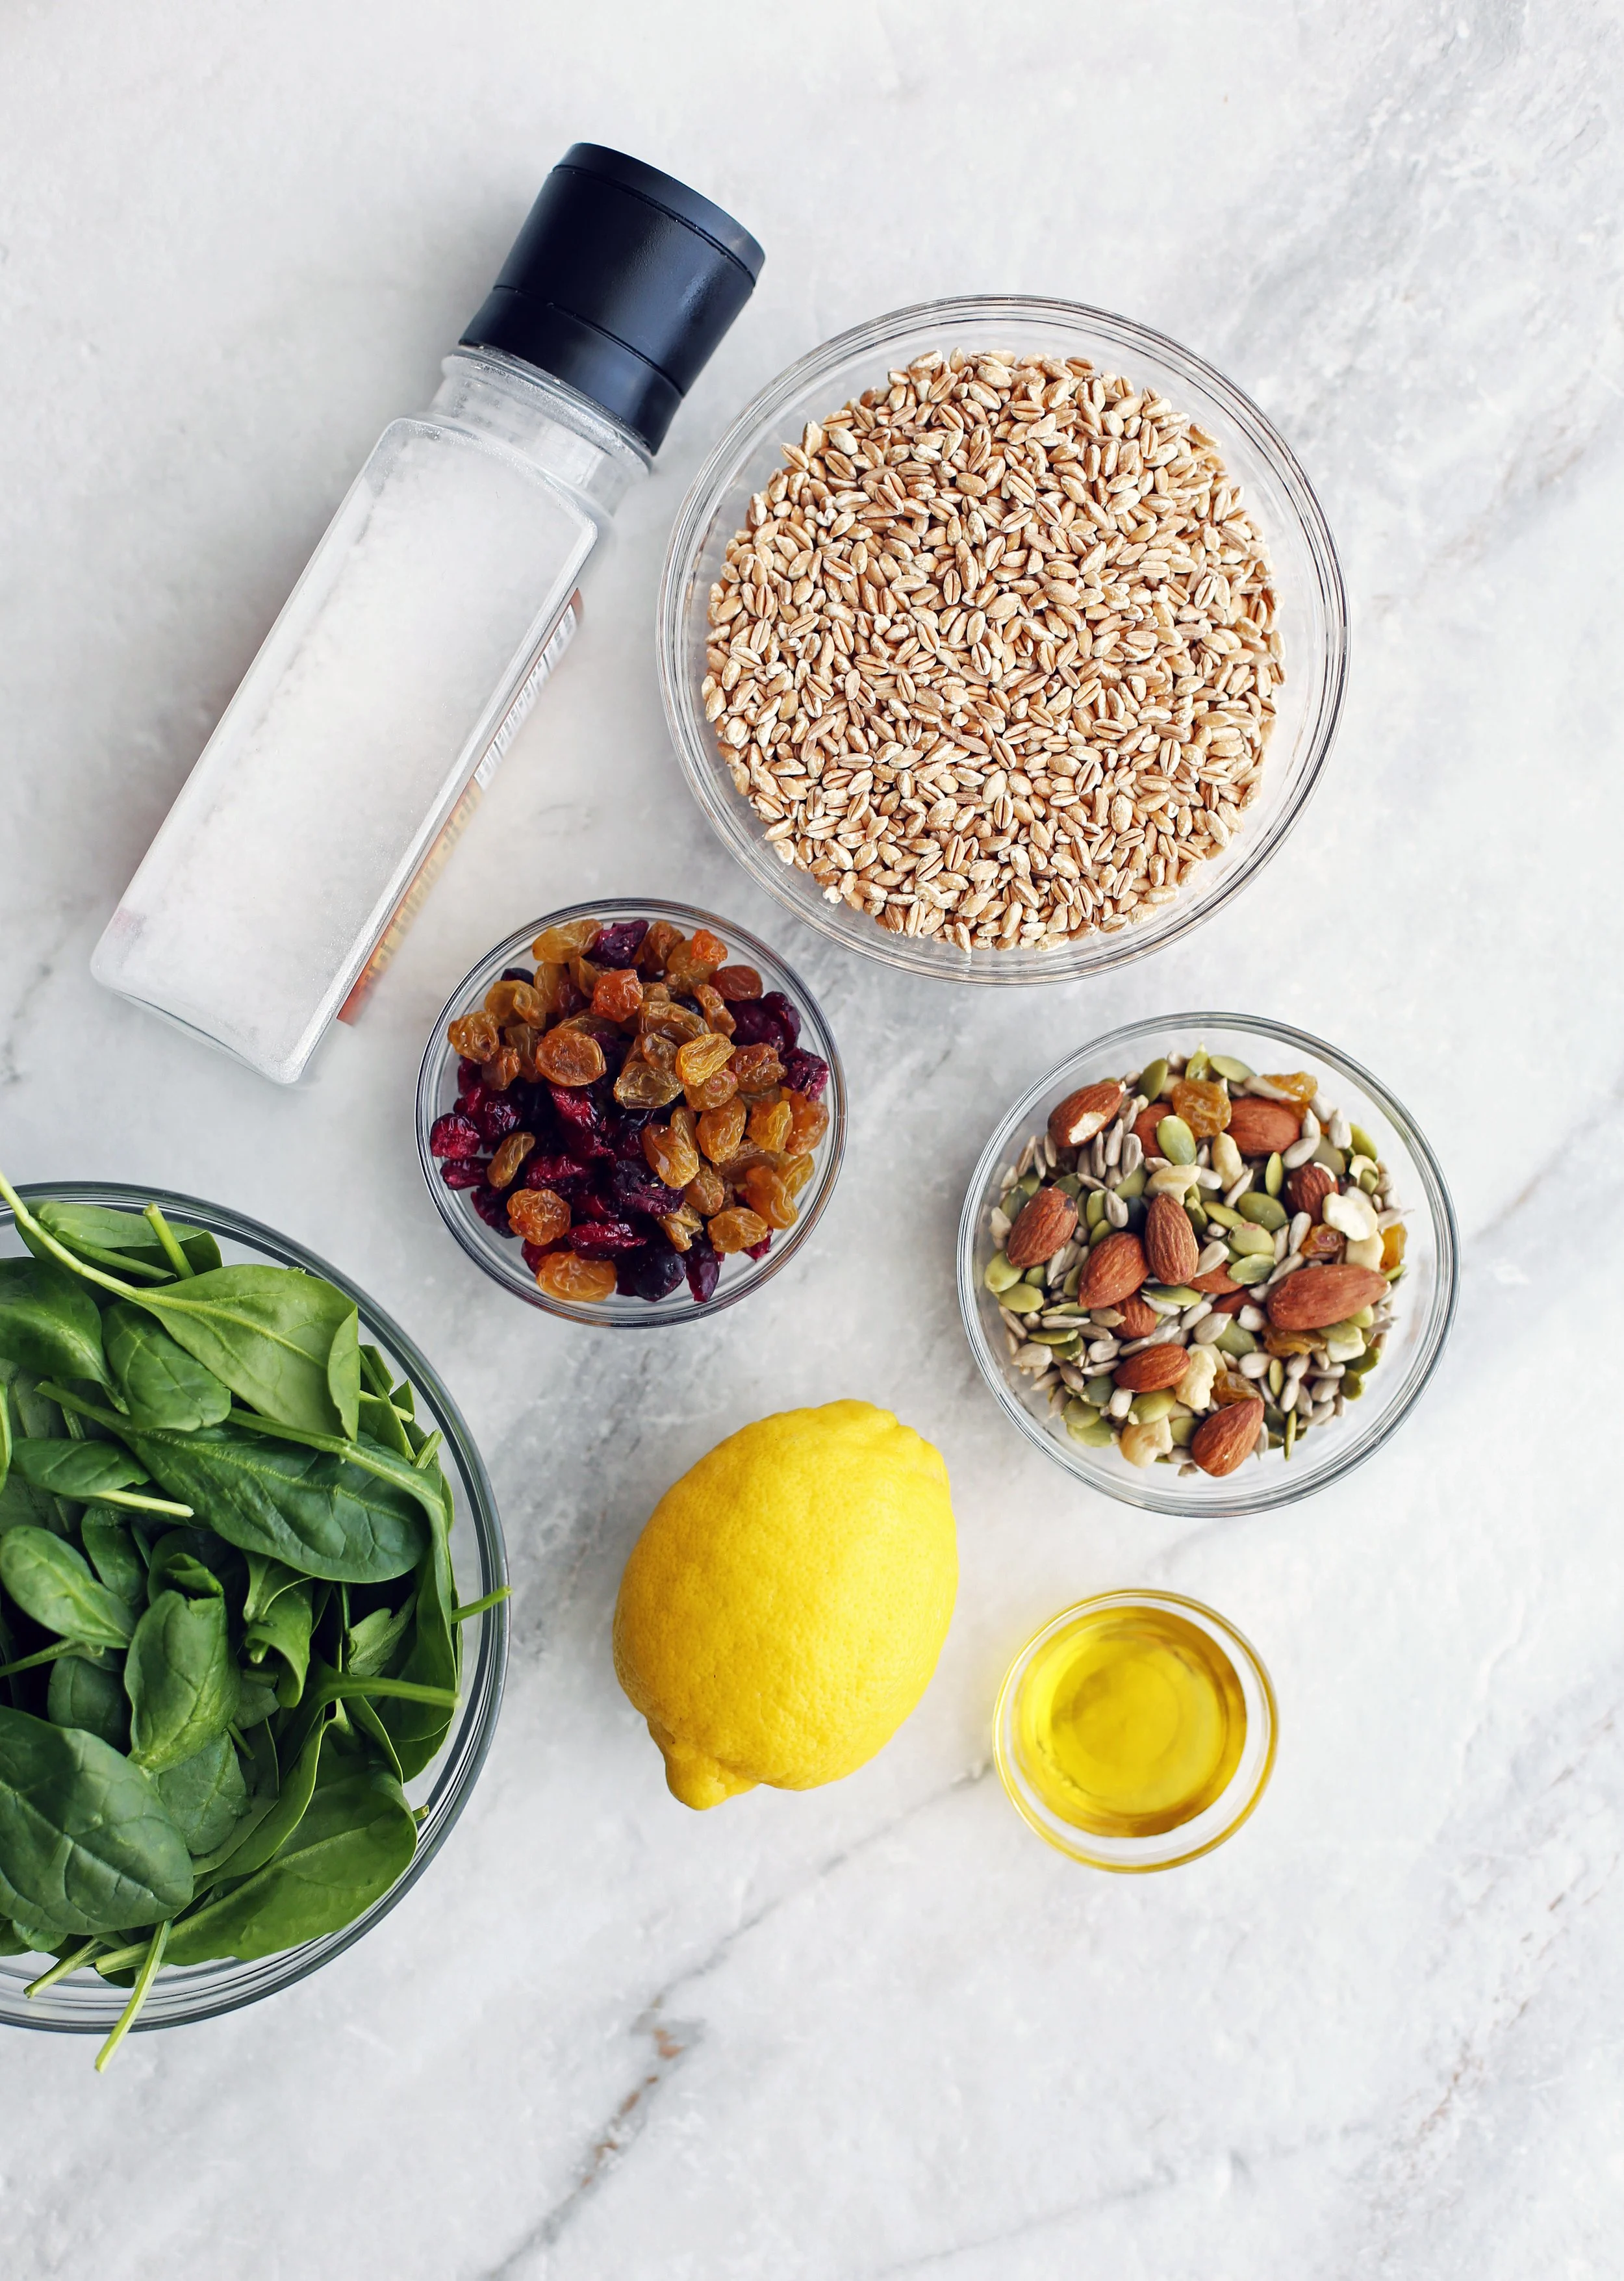 Bowls of baby spinach, dried fruit, nuts and seeds, farro, olive oil along with a lemon and a salt shaker.